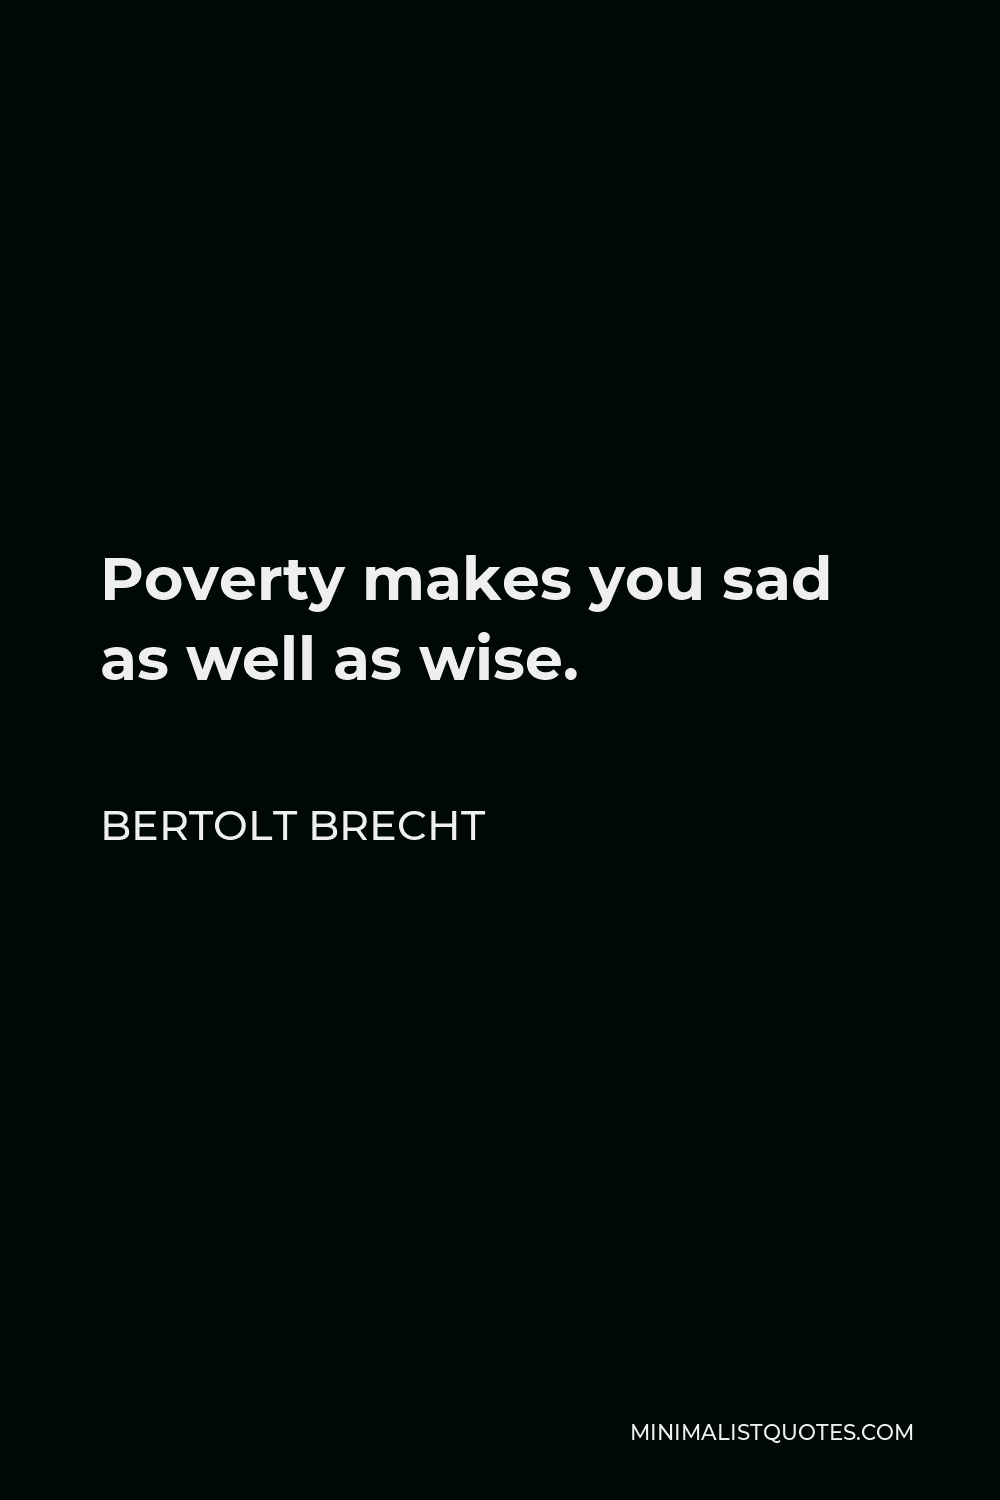 Bertolt Brecht Quote - Poverty makes you sad as well as wise.